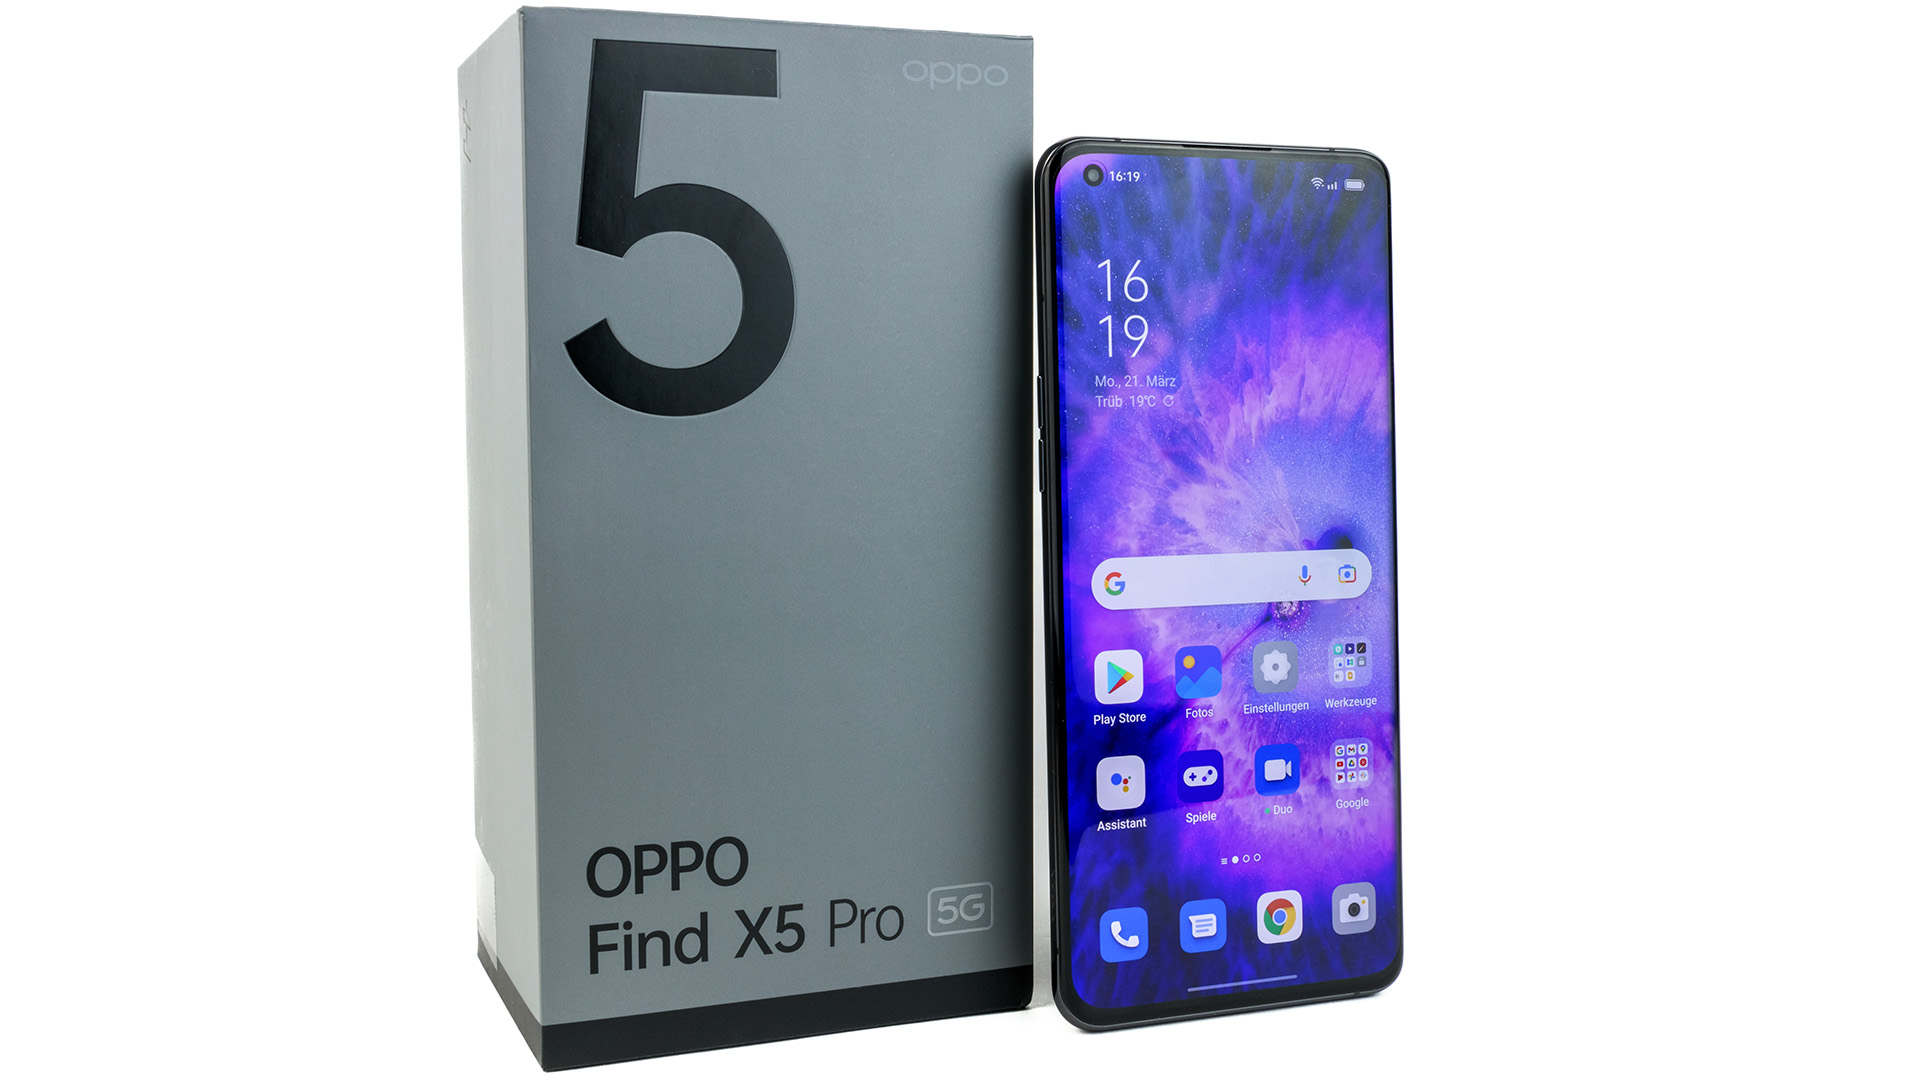 Oppo Find X5 Pro Review - Slick smartphone with a Hasselblad camera - NotebookCheck.net Reviews